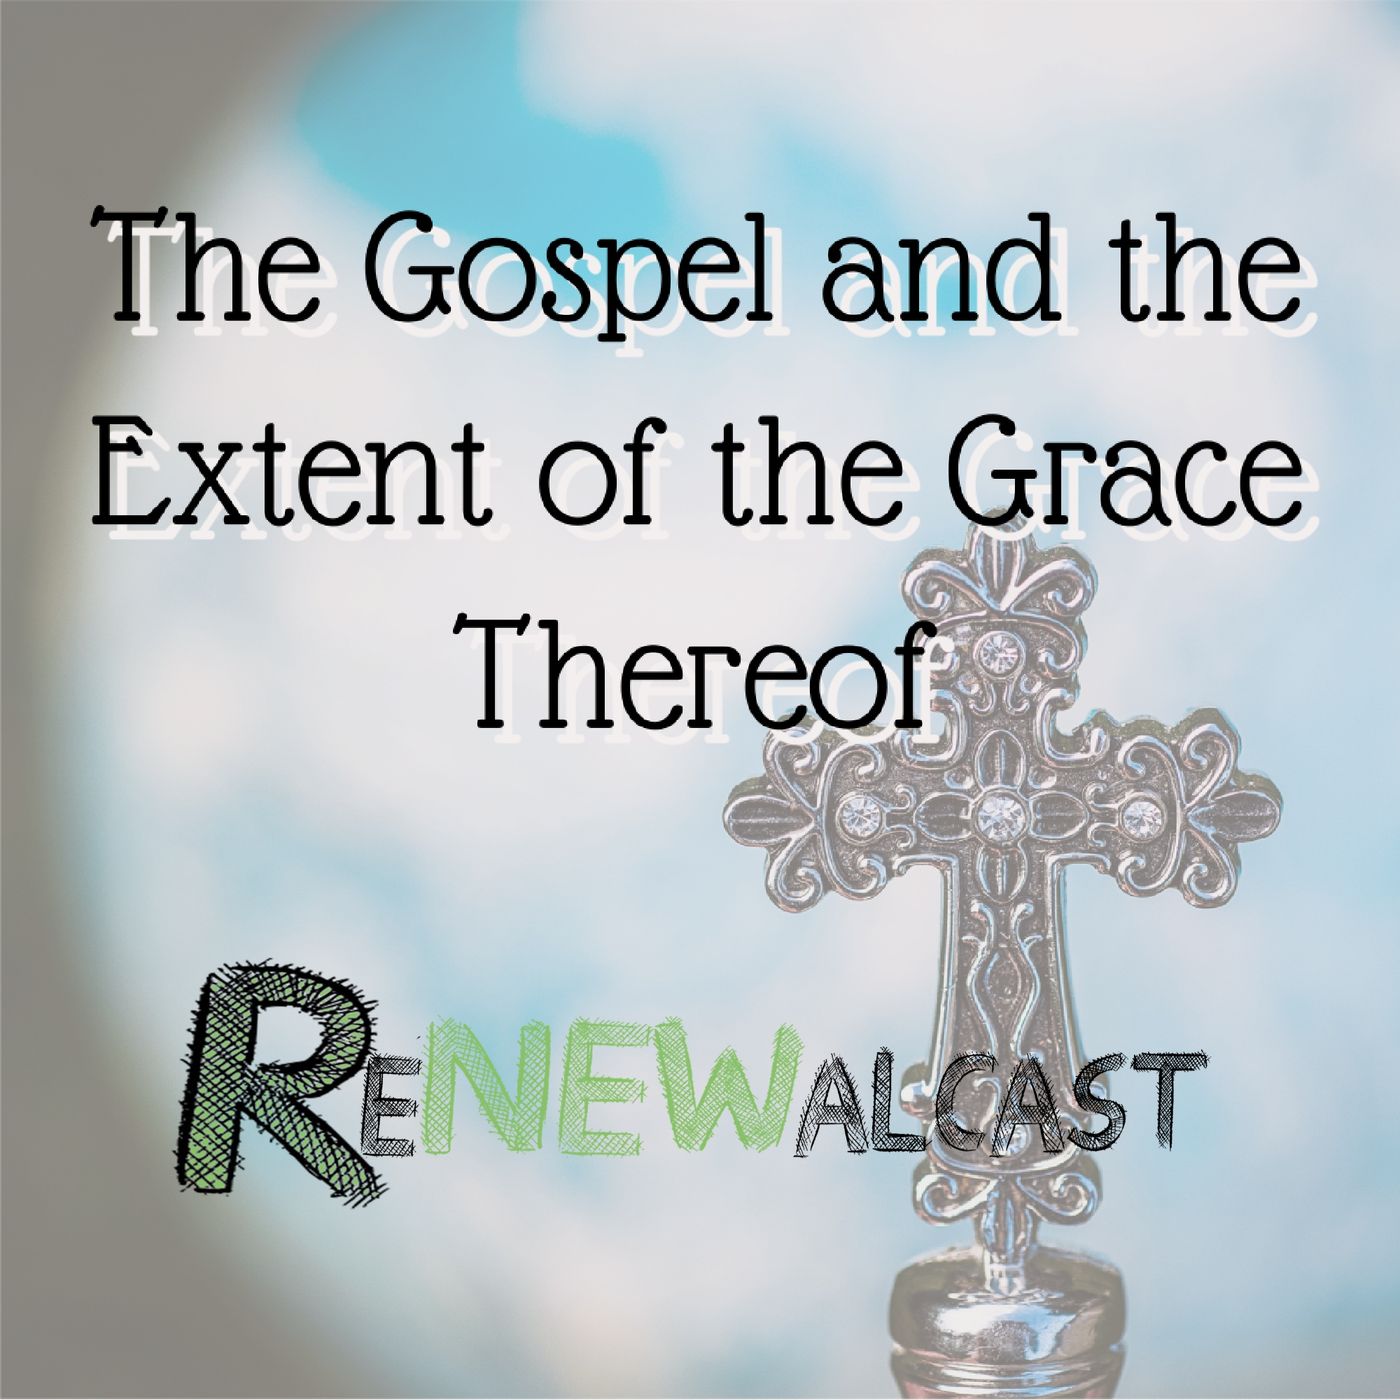 The Gospel and the Extent of the Grace Thereof